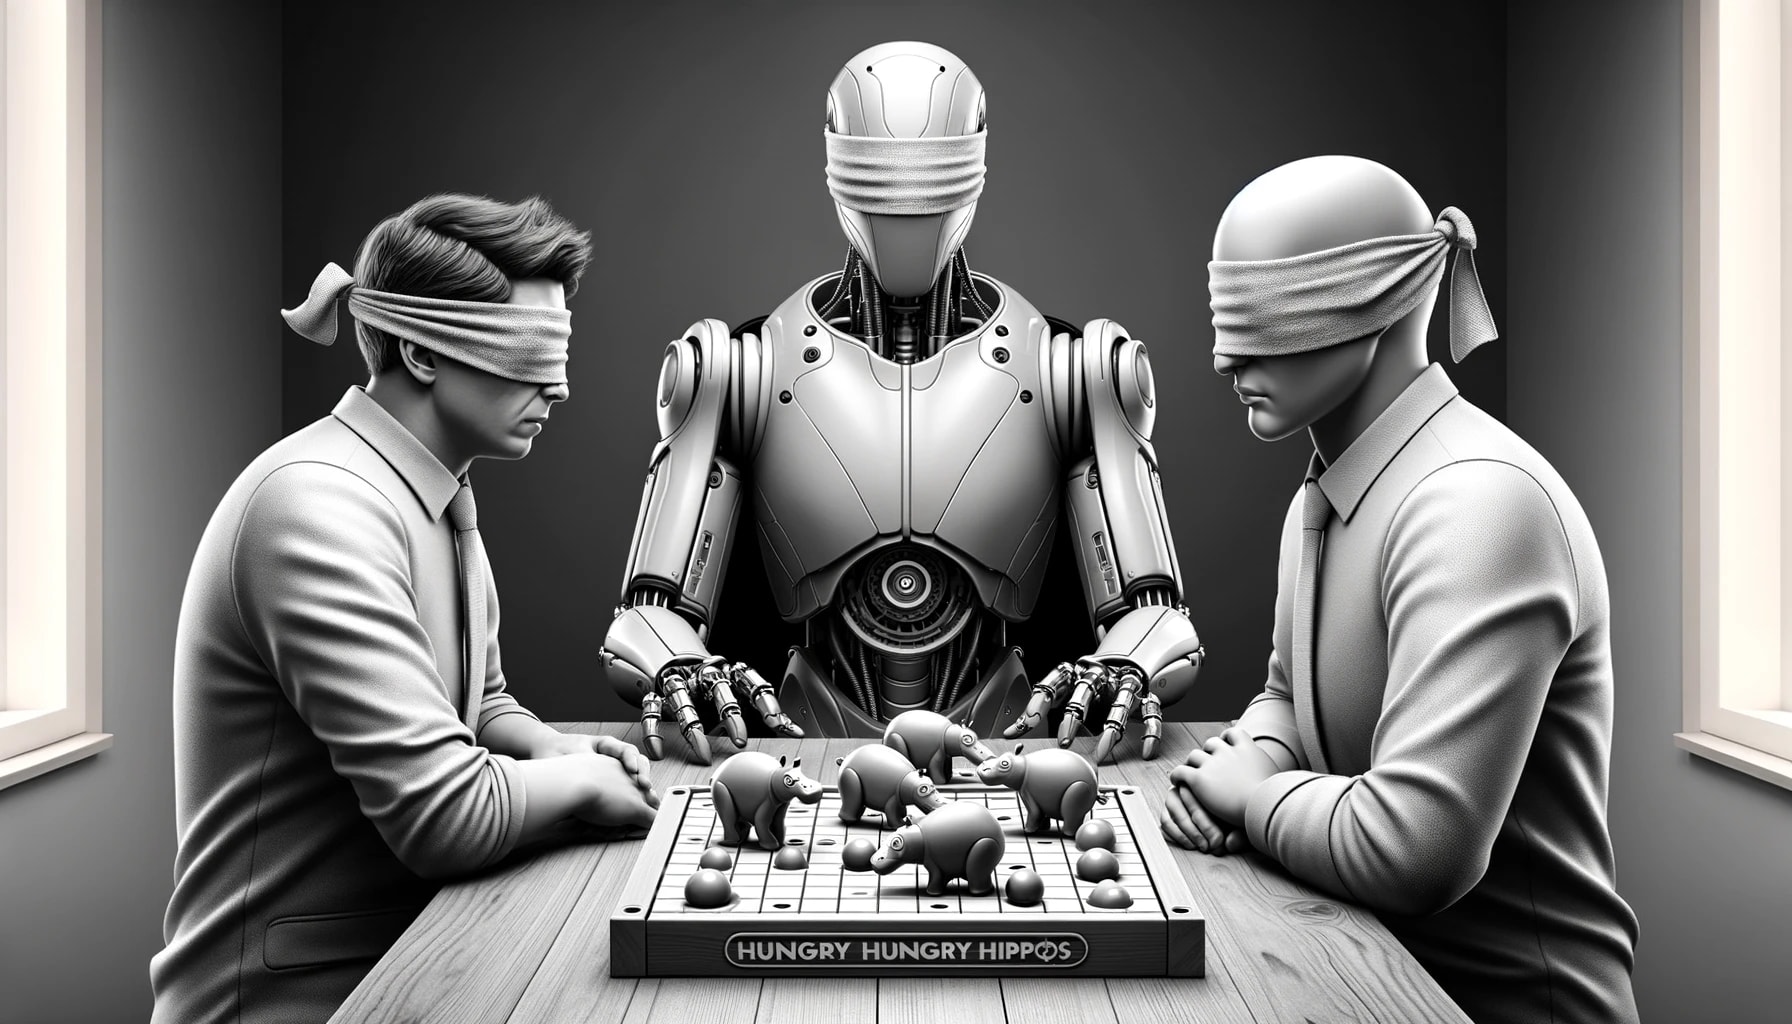 Create a black and white image of a blindfolded robot and a blindfolded human playing Hungry Hungry Hippos in a 3:1 aspect ratio. The robot, with a futuristic, sleek, humanoid design, is seated at the game table with a blindfold covering its optical sensors. Across from the robot, depict a human player, also blindfolded, with an expression of concentration, as they engage in the game. The human